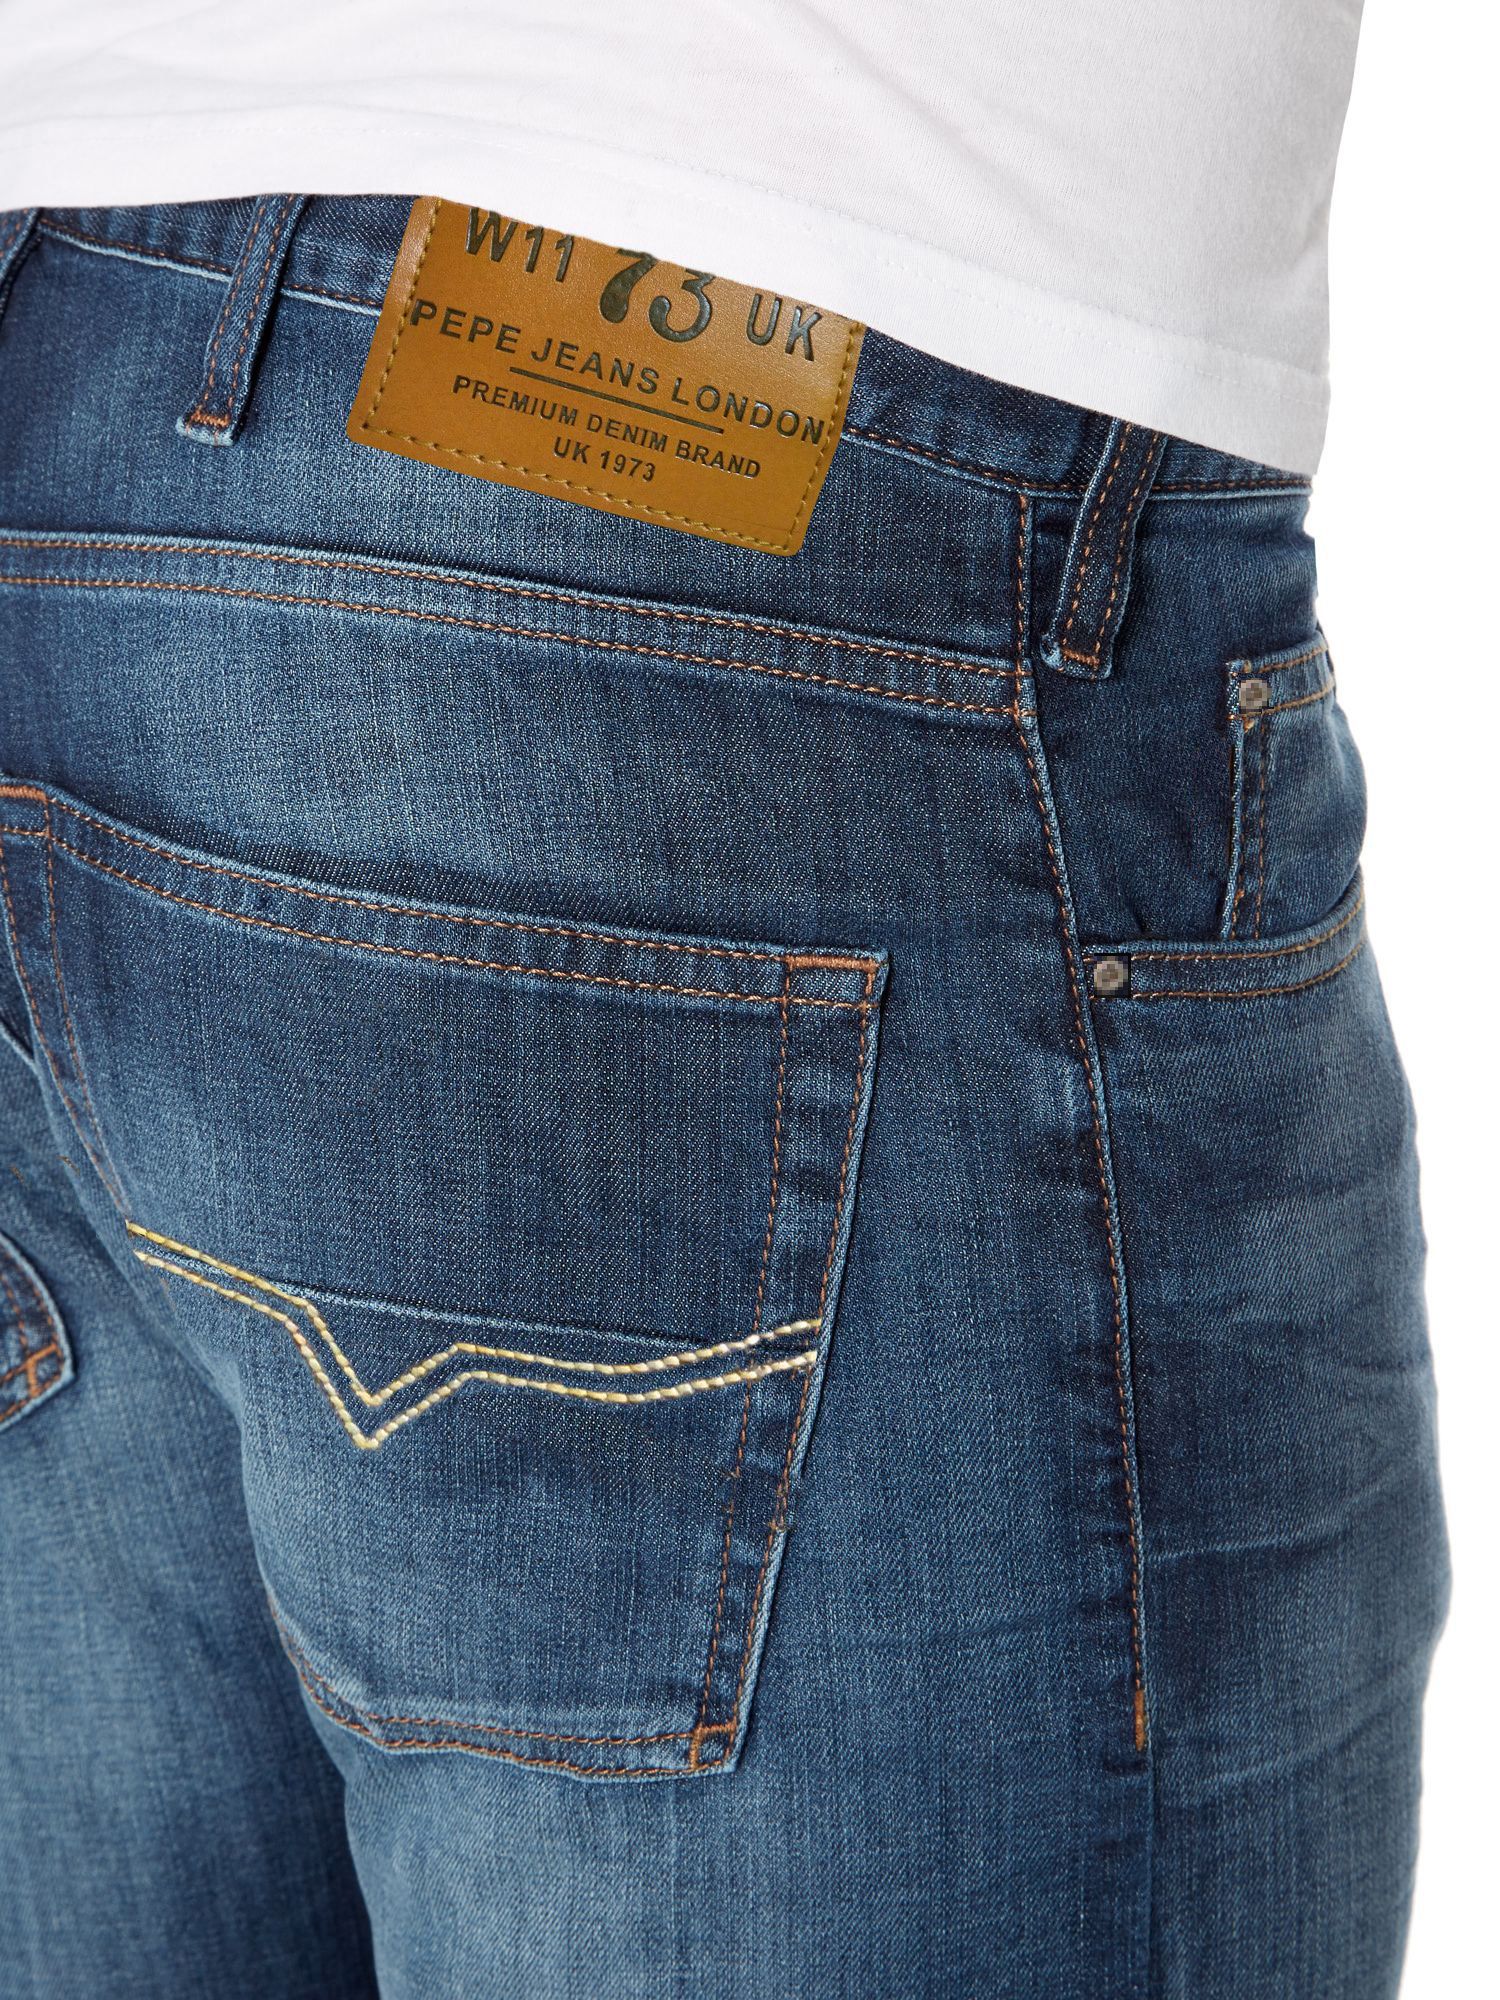 pepe jeans jeans prices